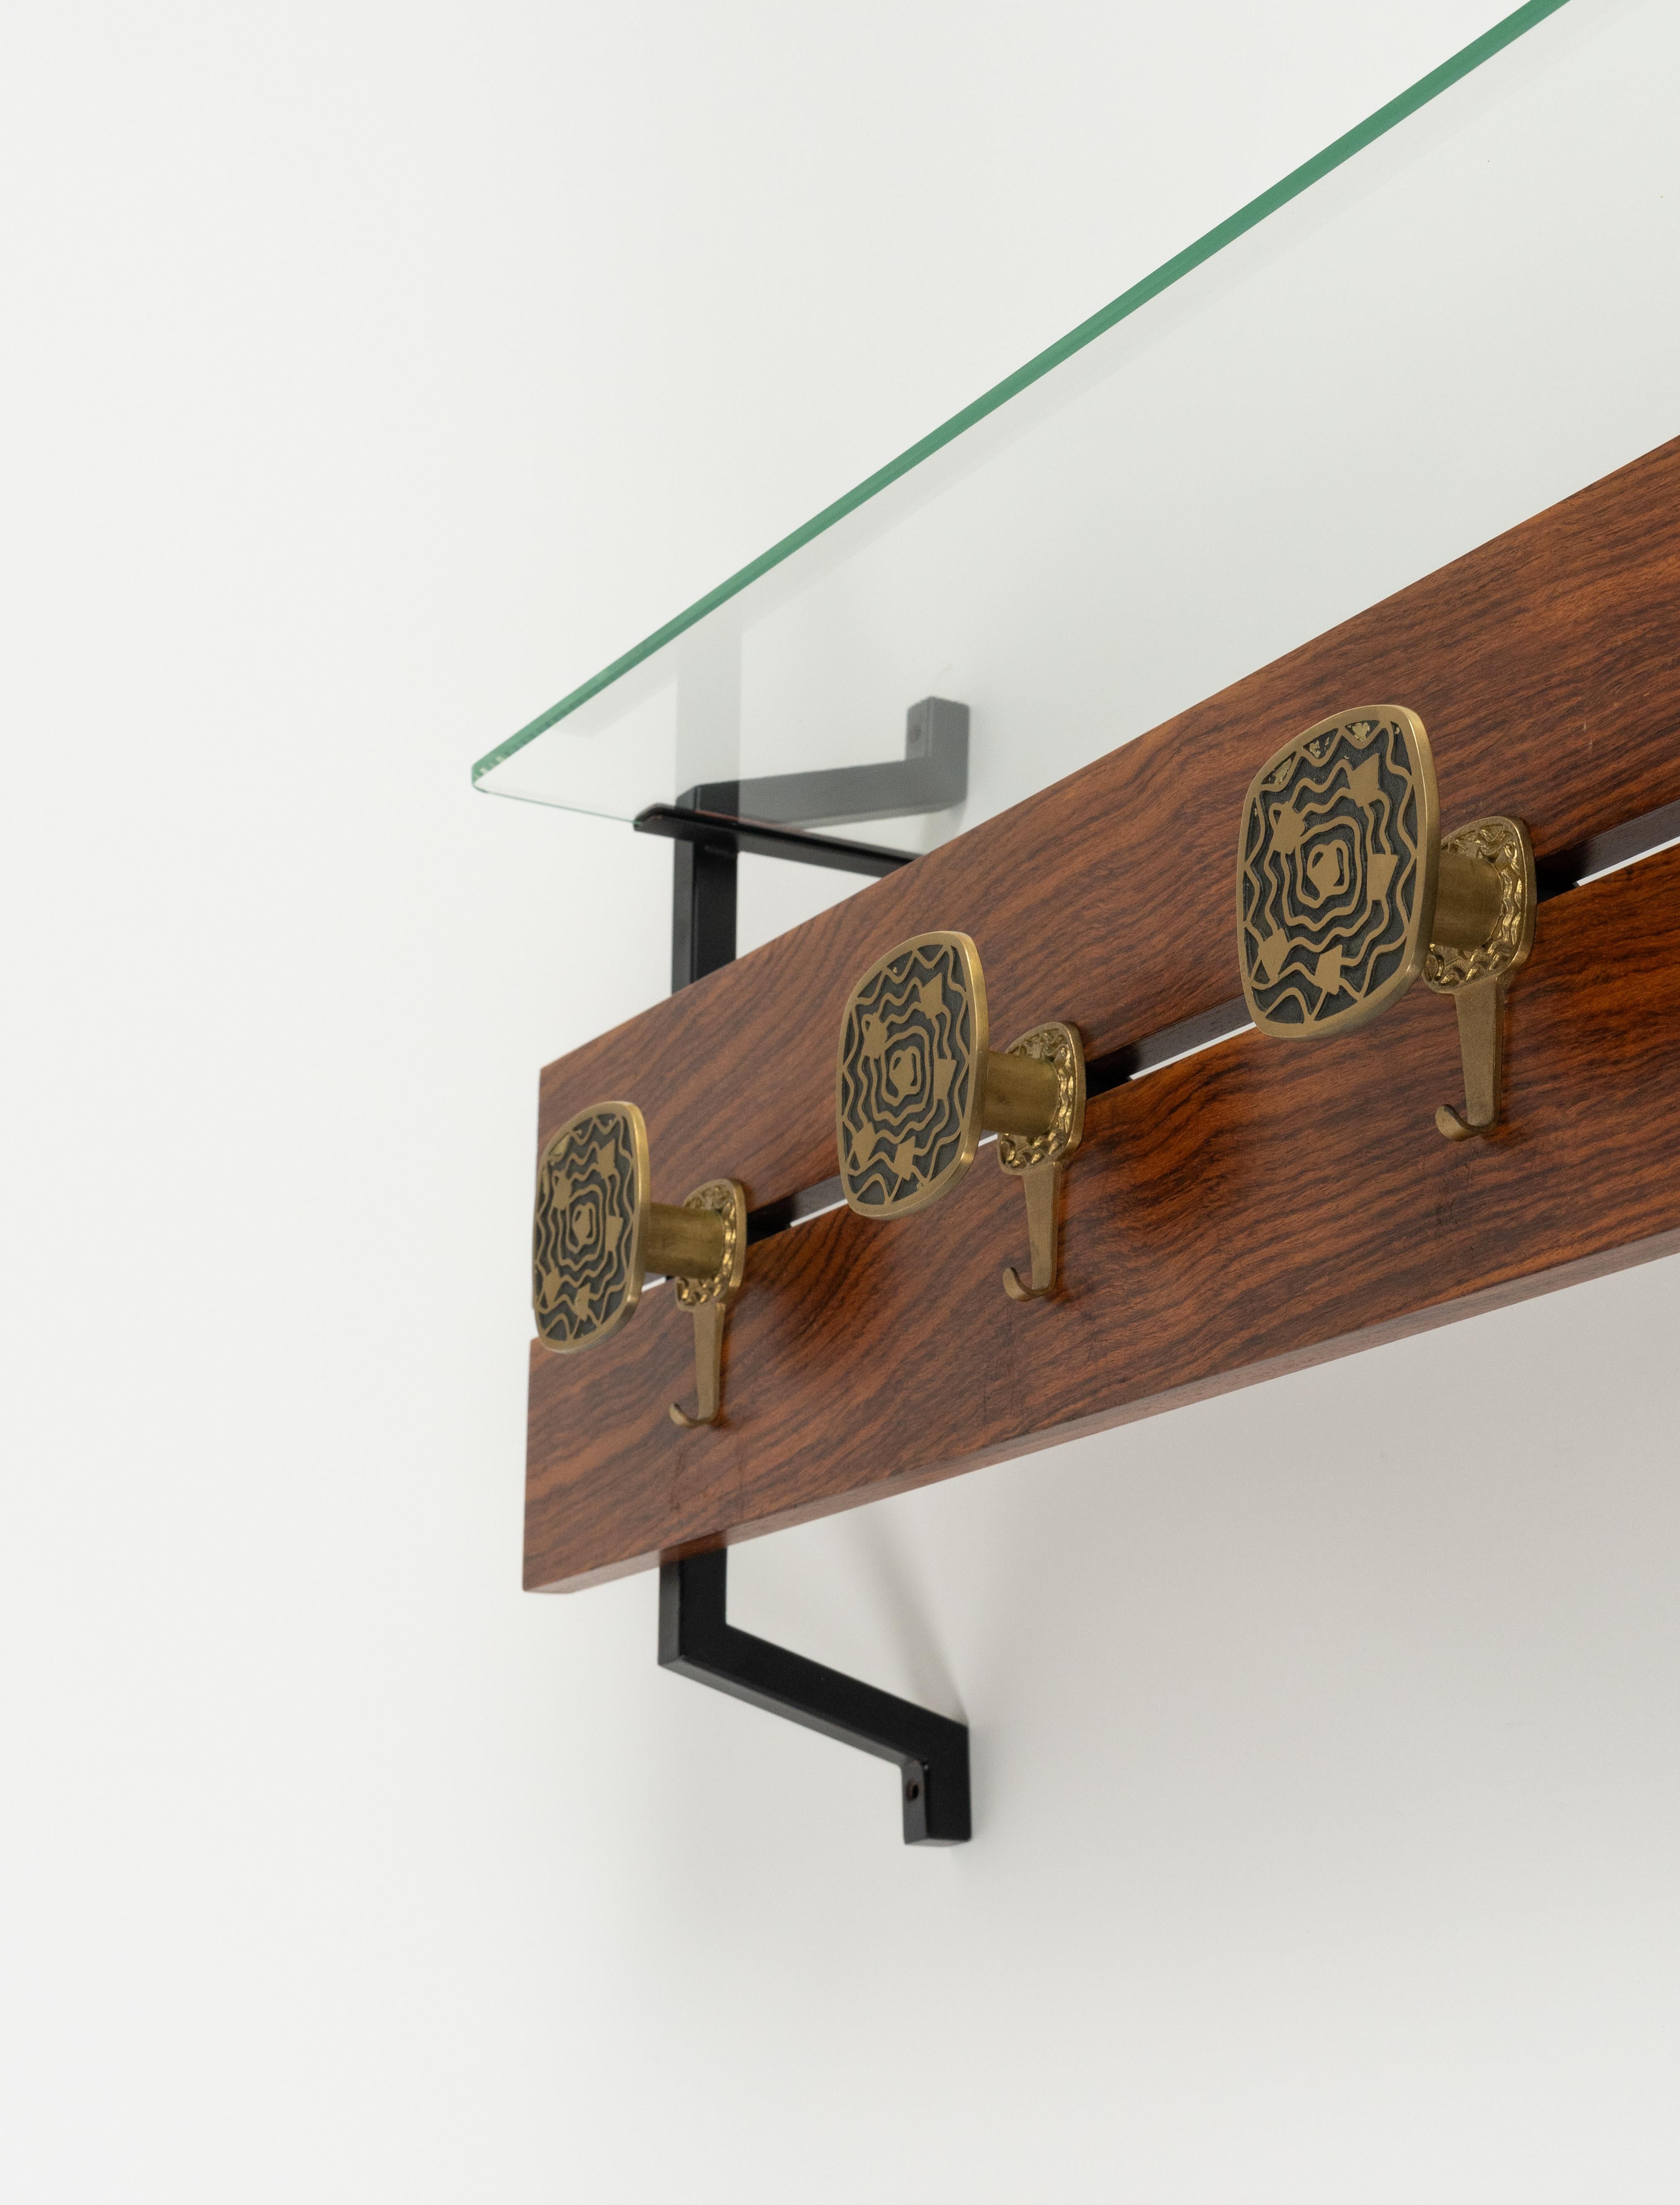 Midcentury Wood, Glass and Brass Coat Rack Herta Baller Style, Italy 1970s For Sale 7